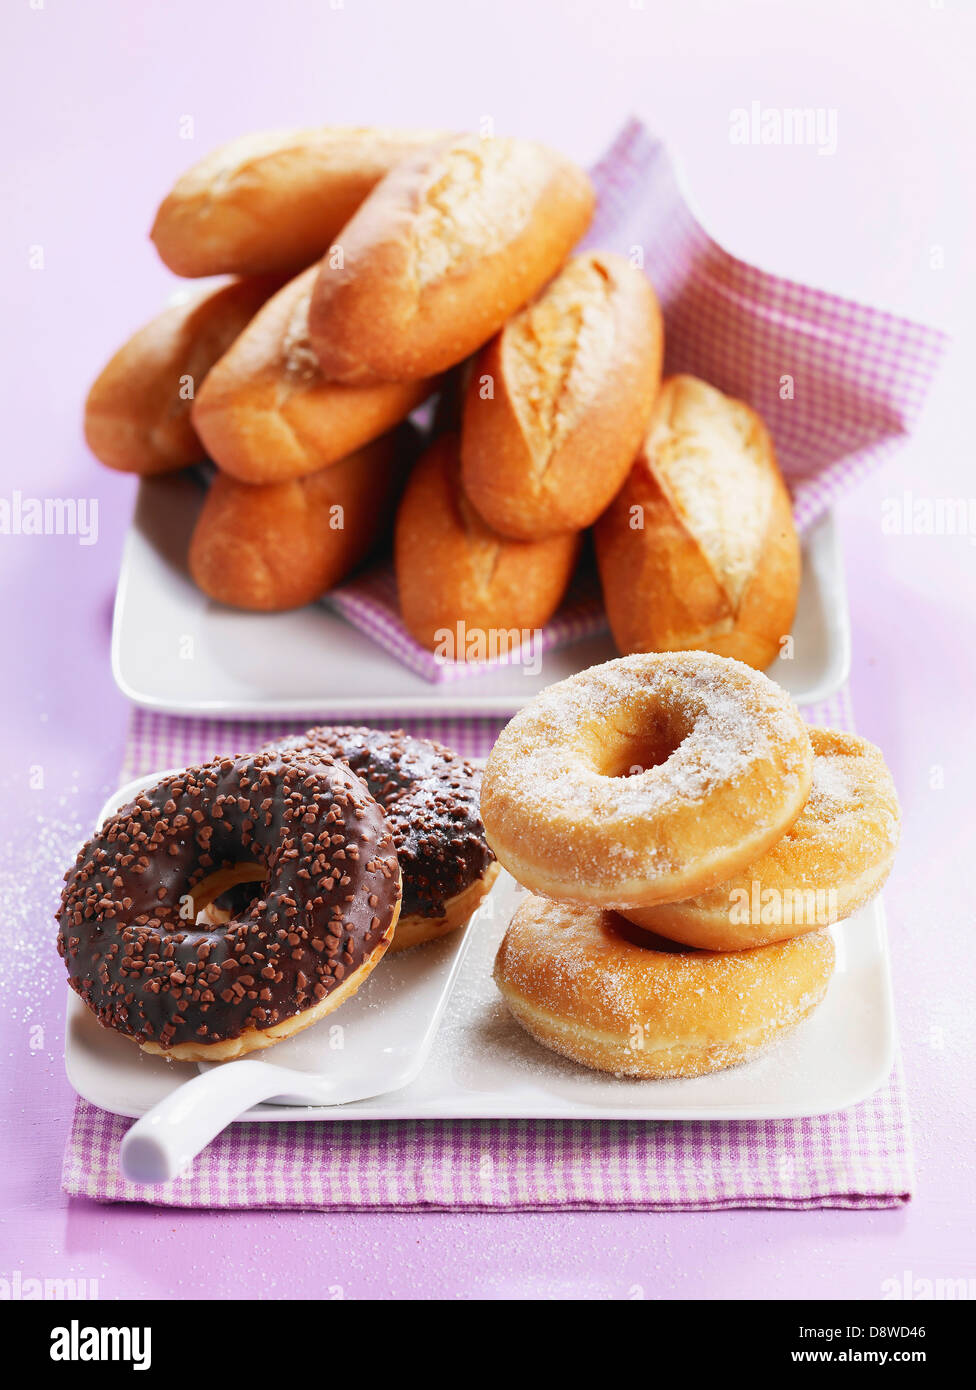 Plain and chocolate donuts Stock Photo